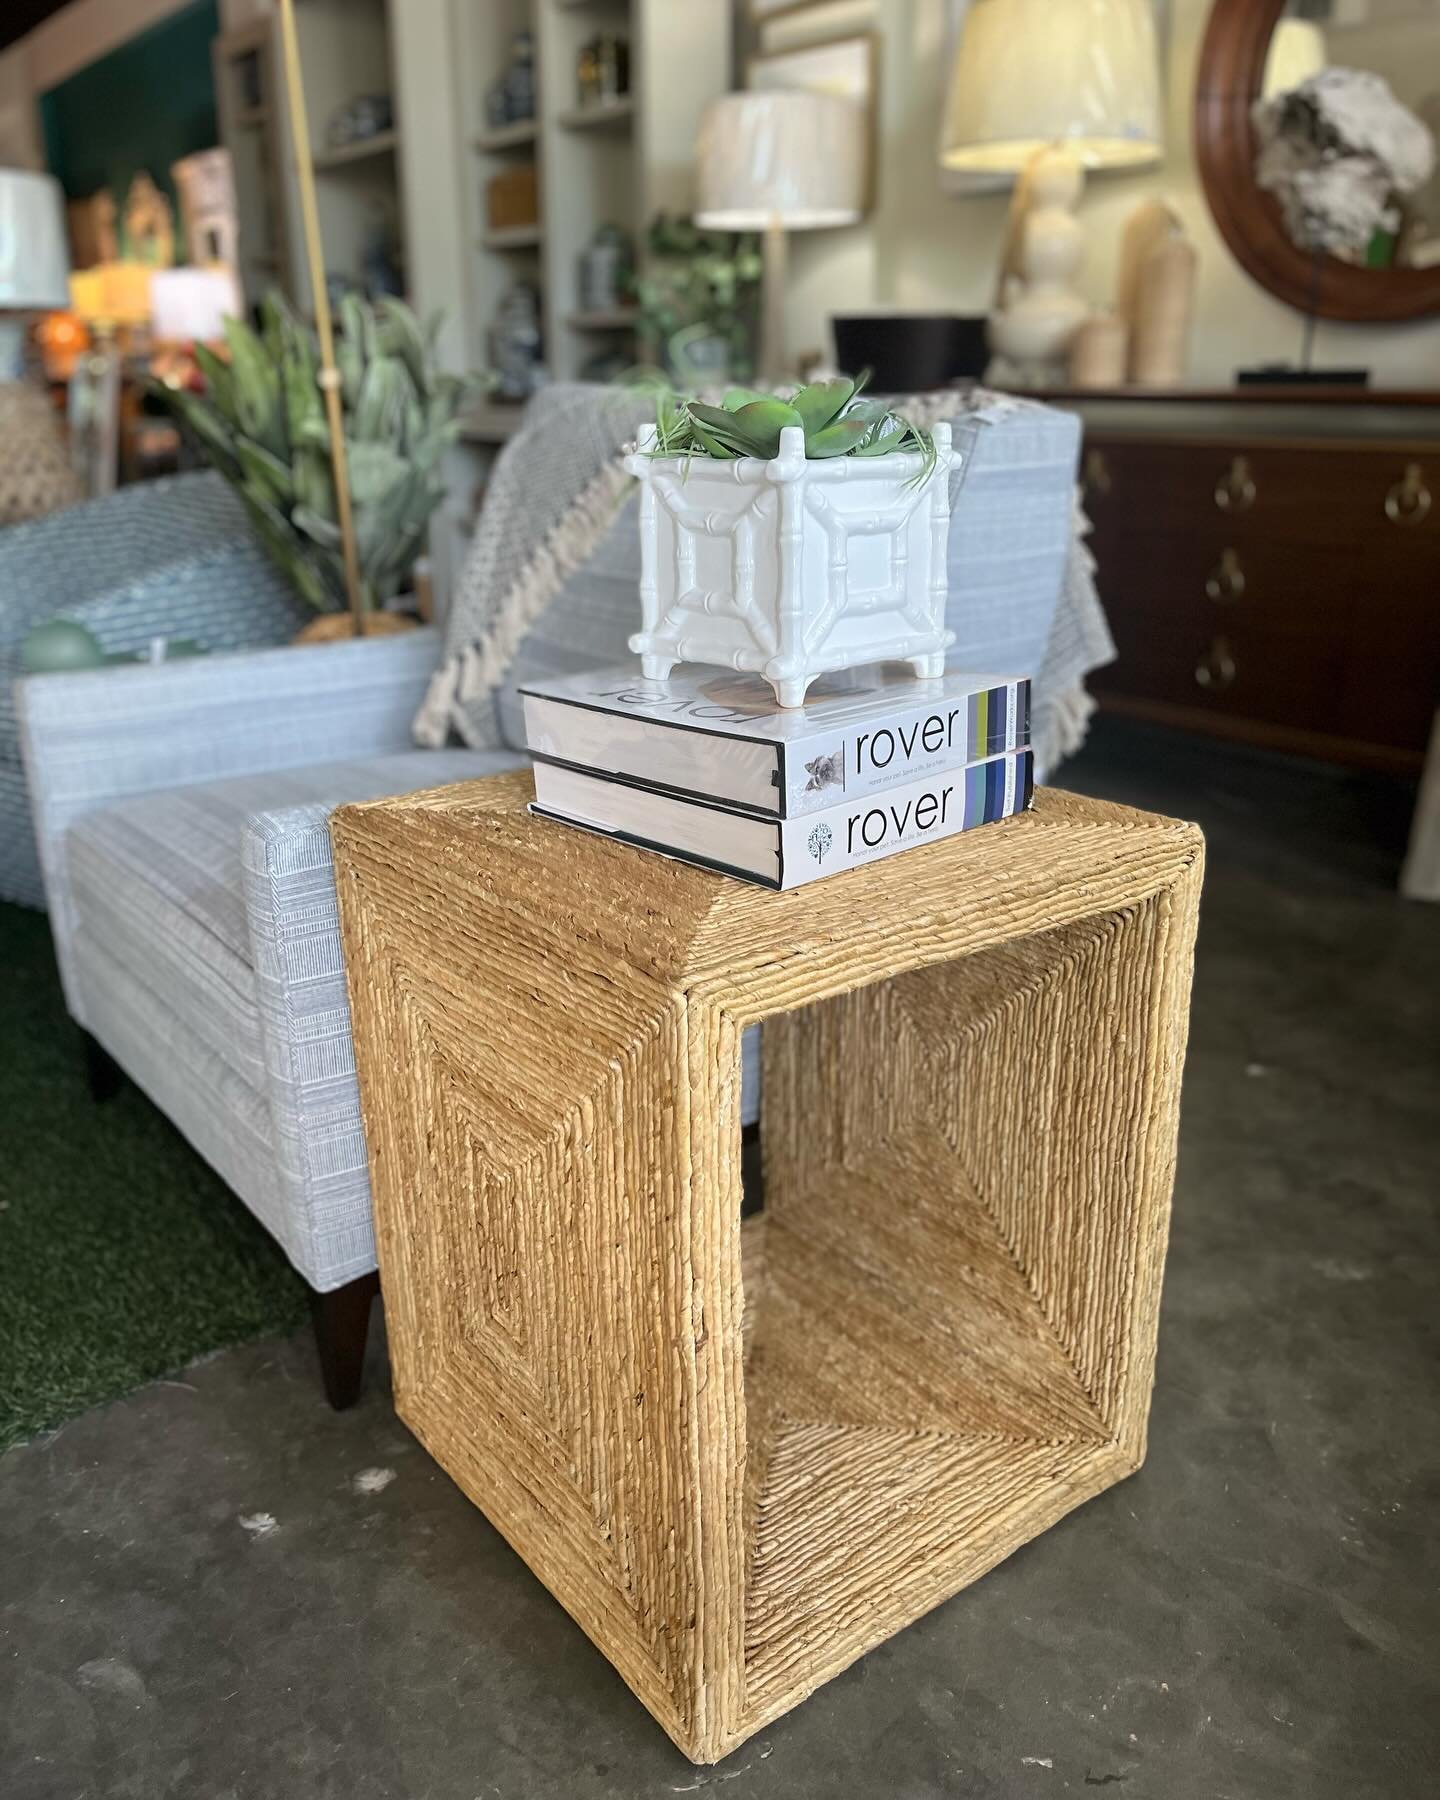 Casual coastal complete with extra space to display your things ☺️ 

#decorativeartsverobeach #uttermost #sidetables #interiordesign #accentfurniture #florida #decor #homedecor